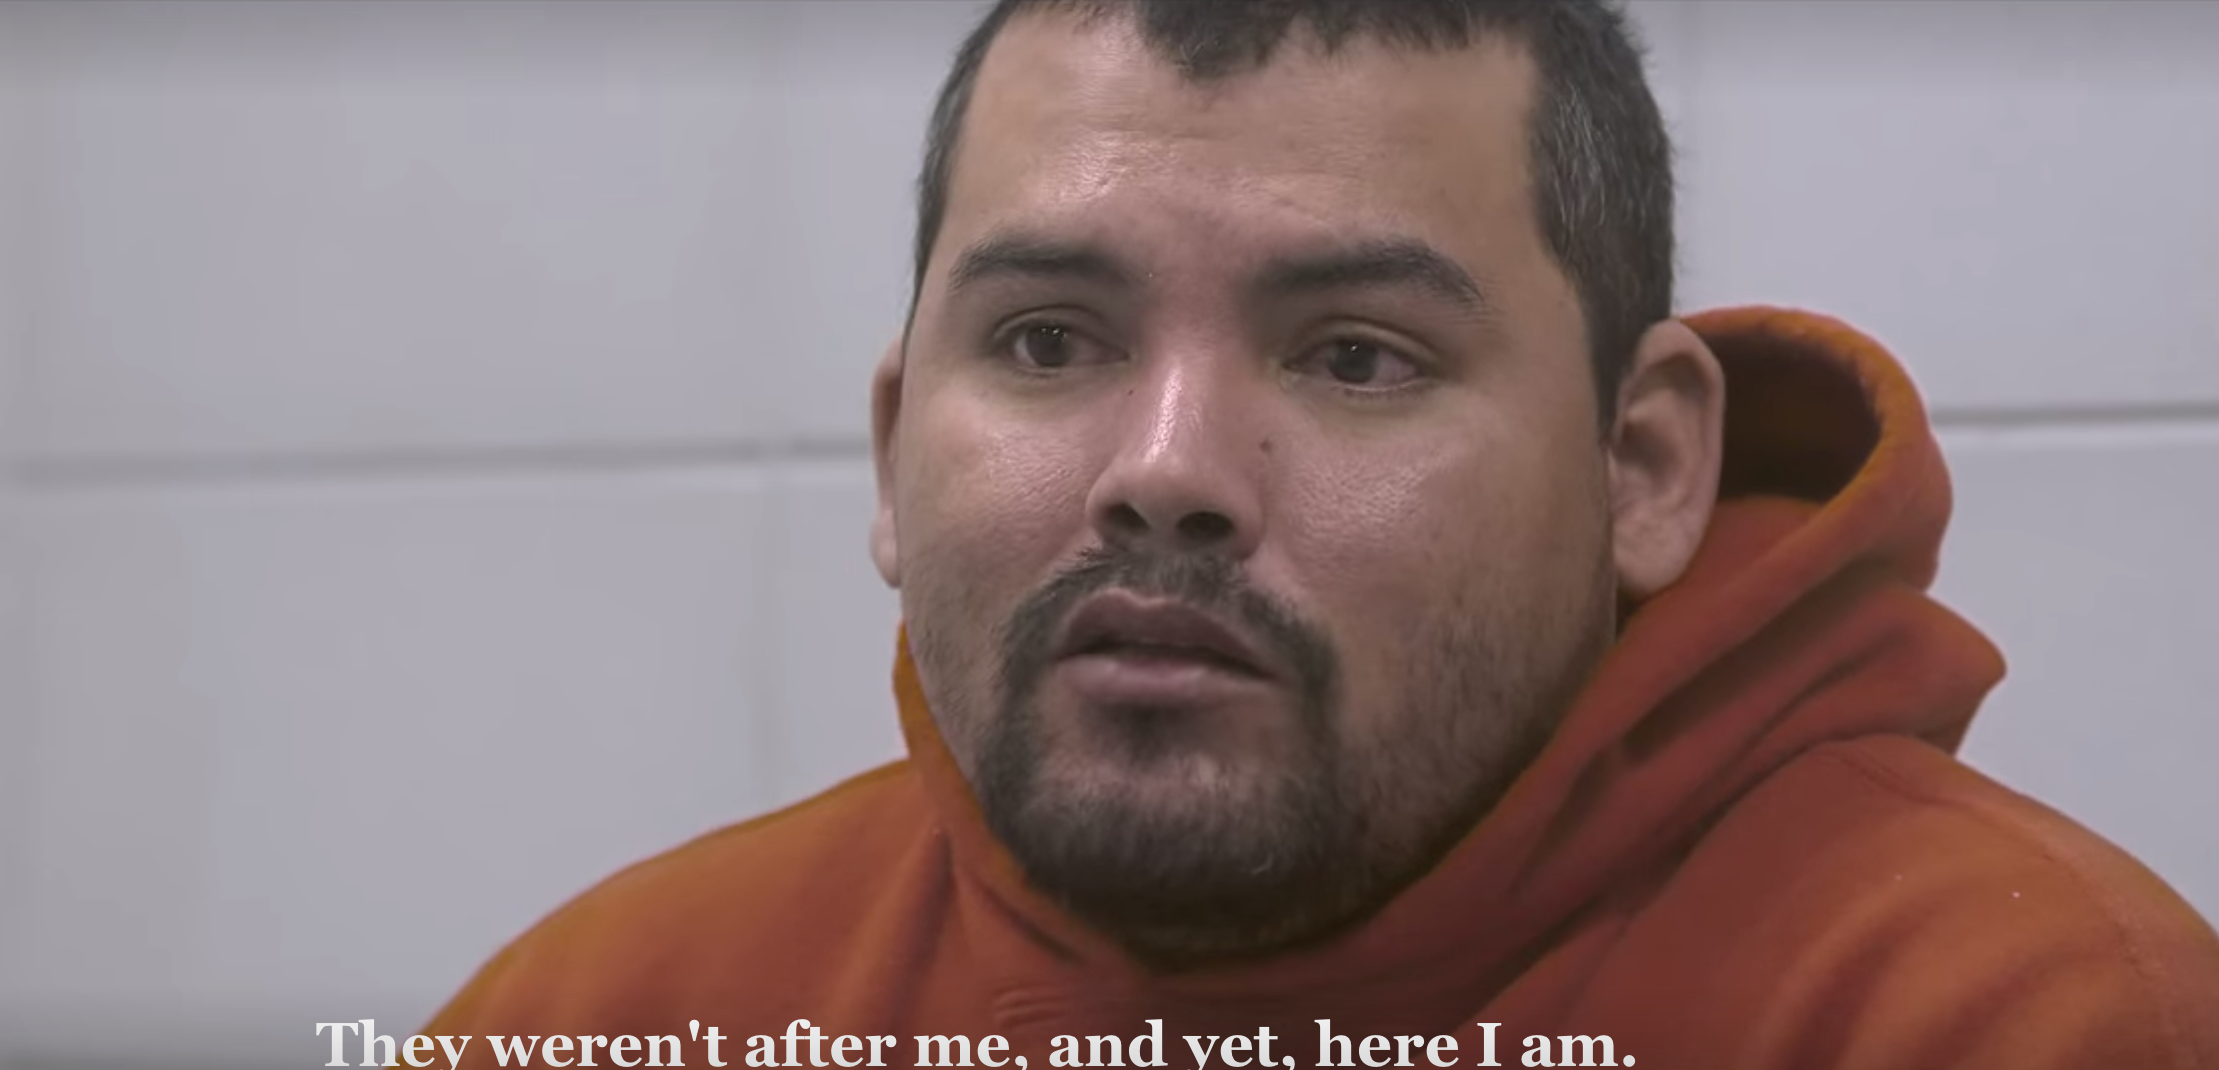 Screen capture of interview with an undocumented immigrant from Immigration Nation